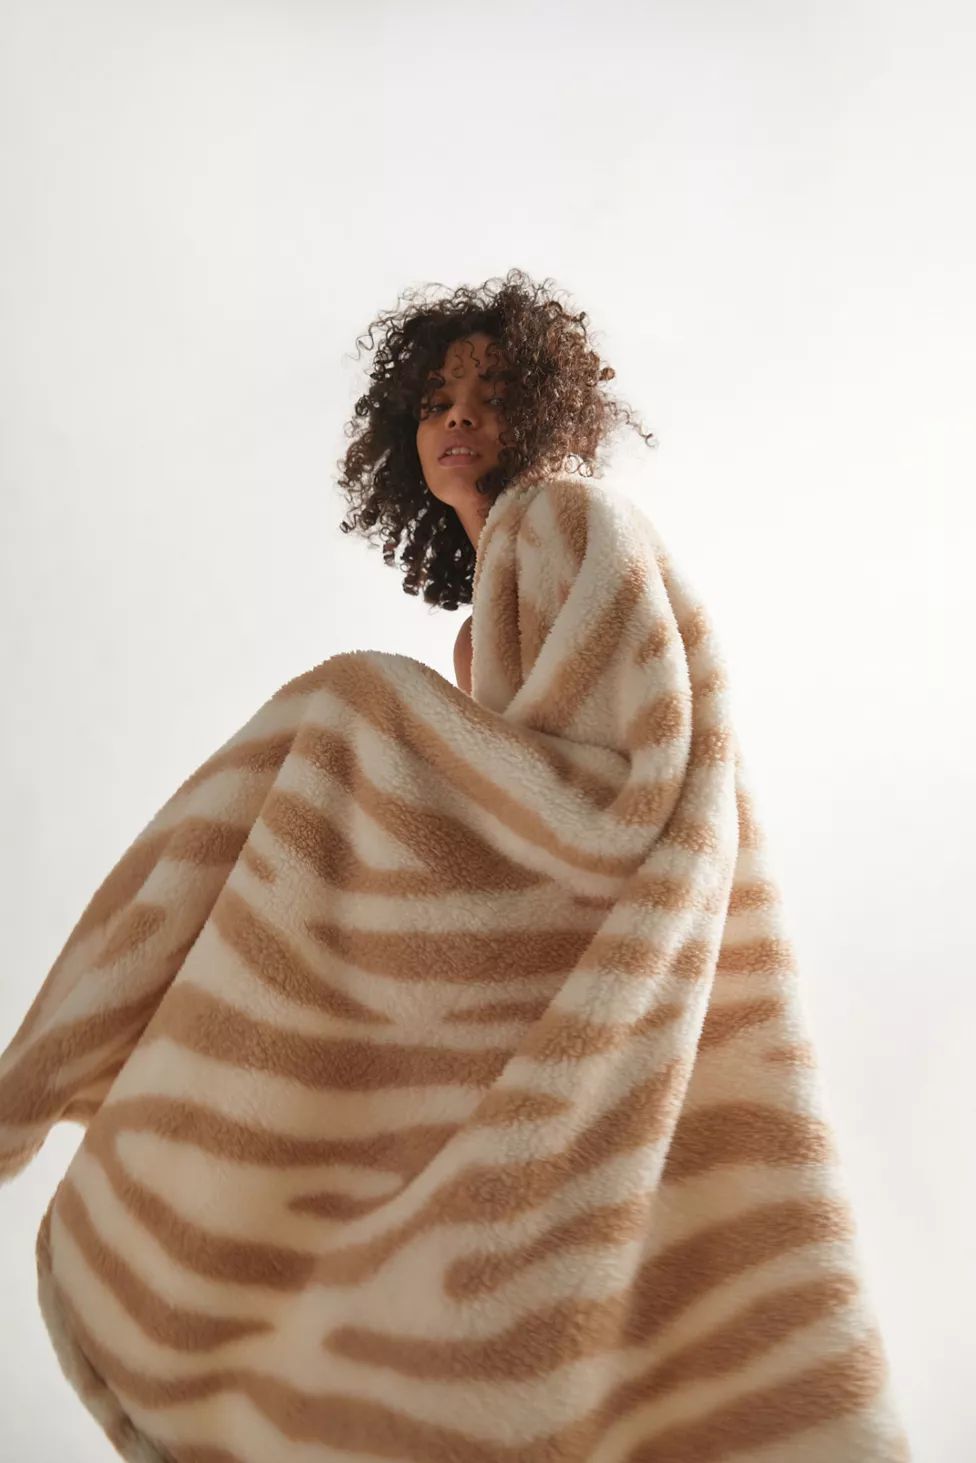 Printed Super Plush Throw Blanket | Urban Outfitters (US and RoW)